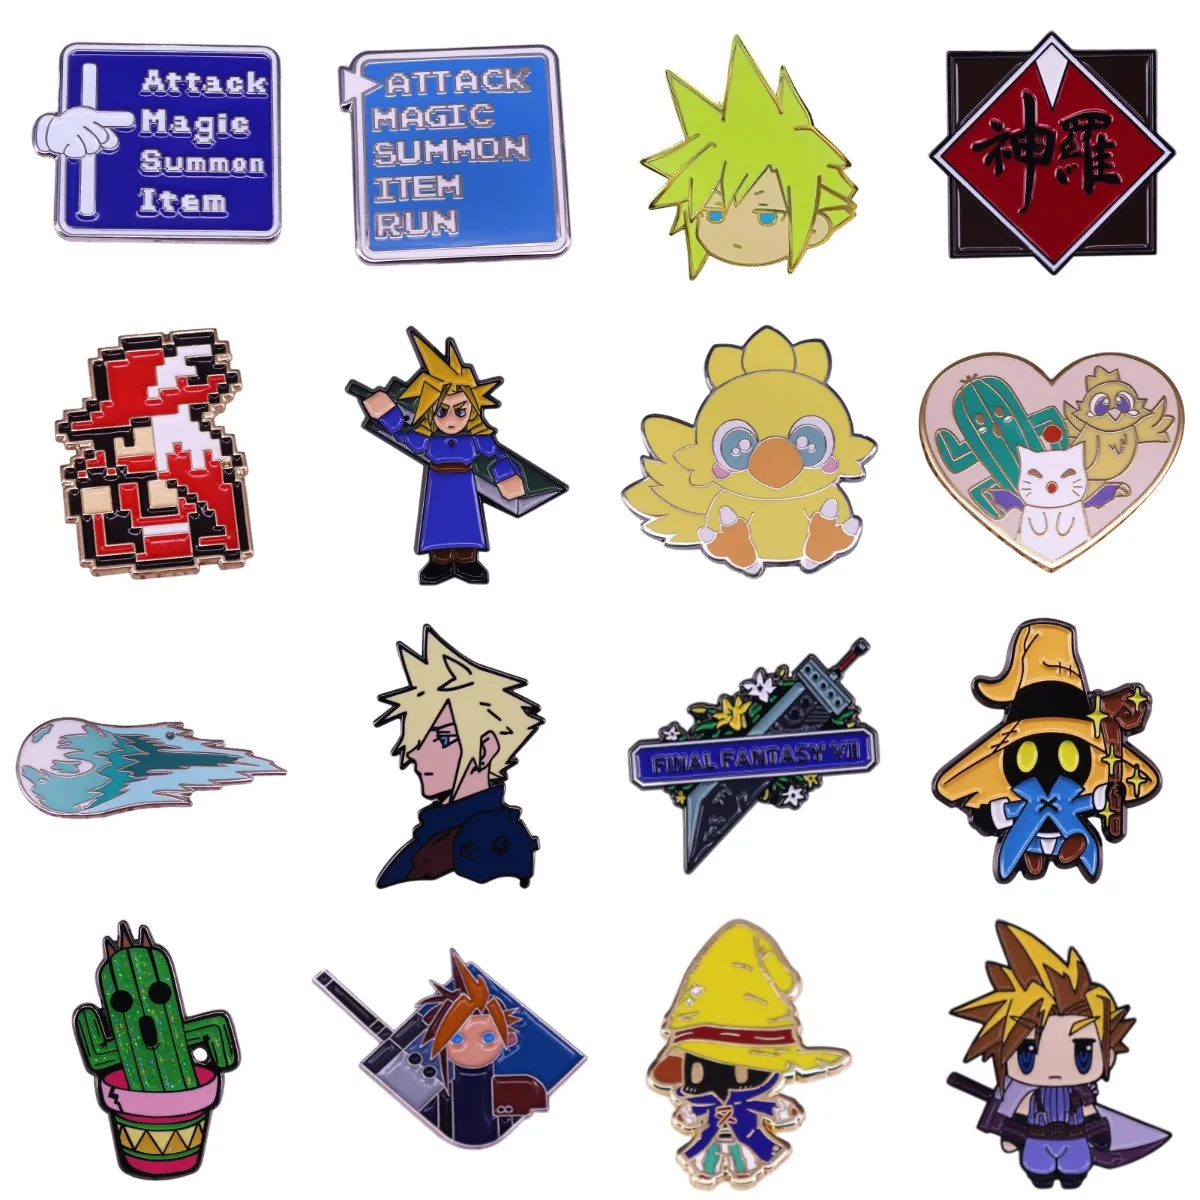 Excellent Quality Game Enamel Pin Cloud Strife Buster Sword Meteor Chocobo Red Mage Vivi Badge Shinra Attack Menu Gamer Brooches